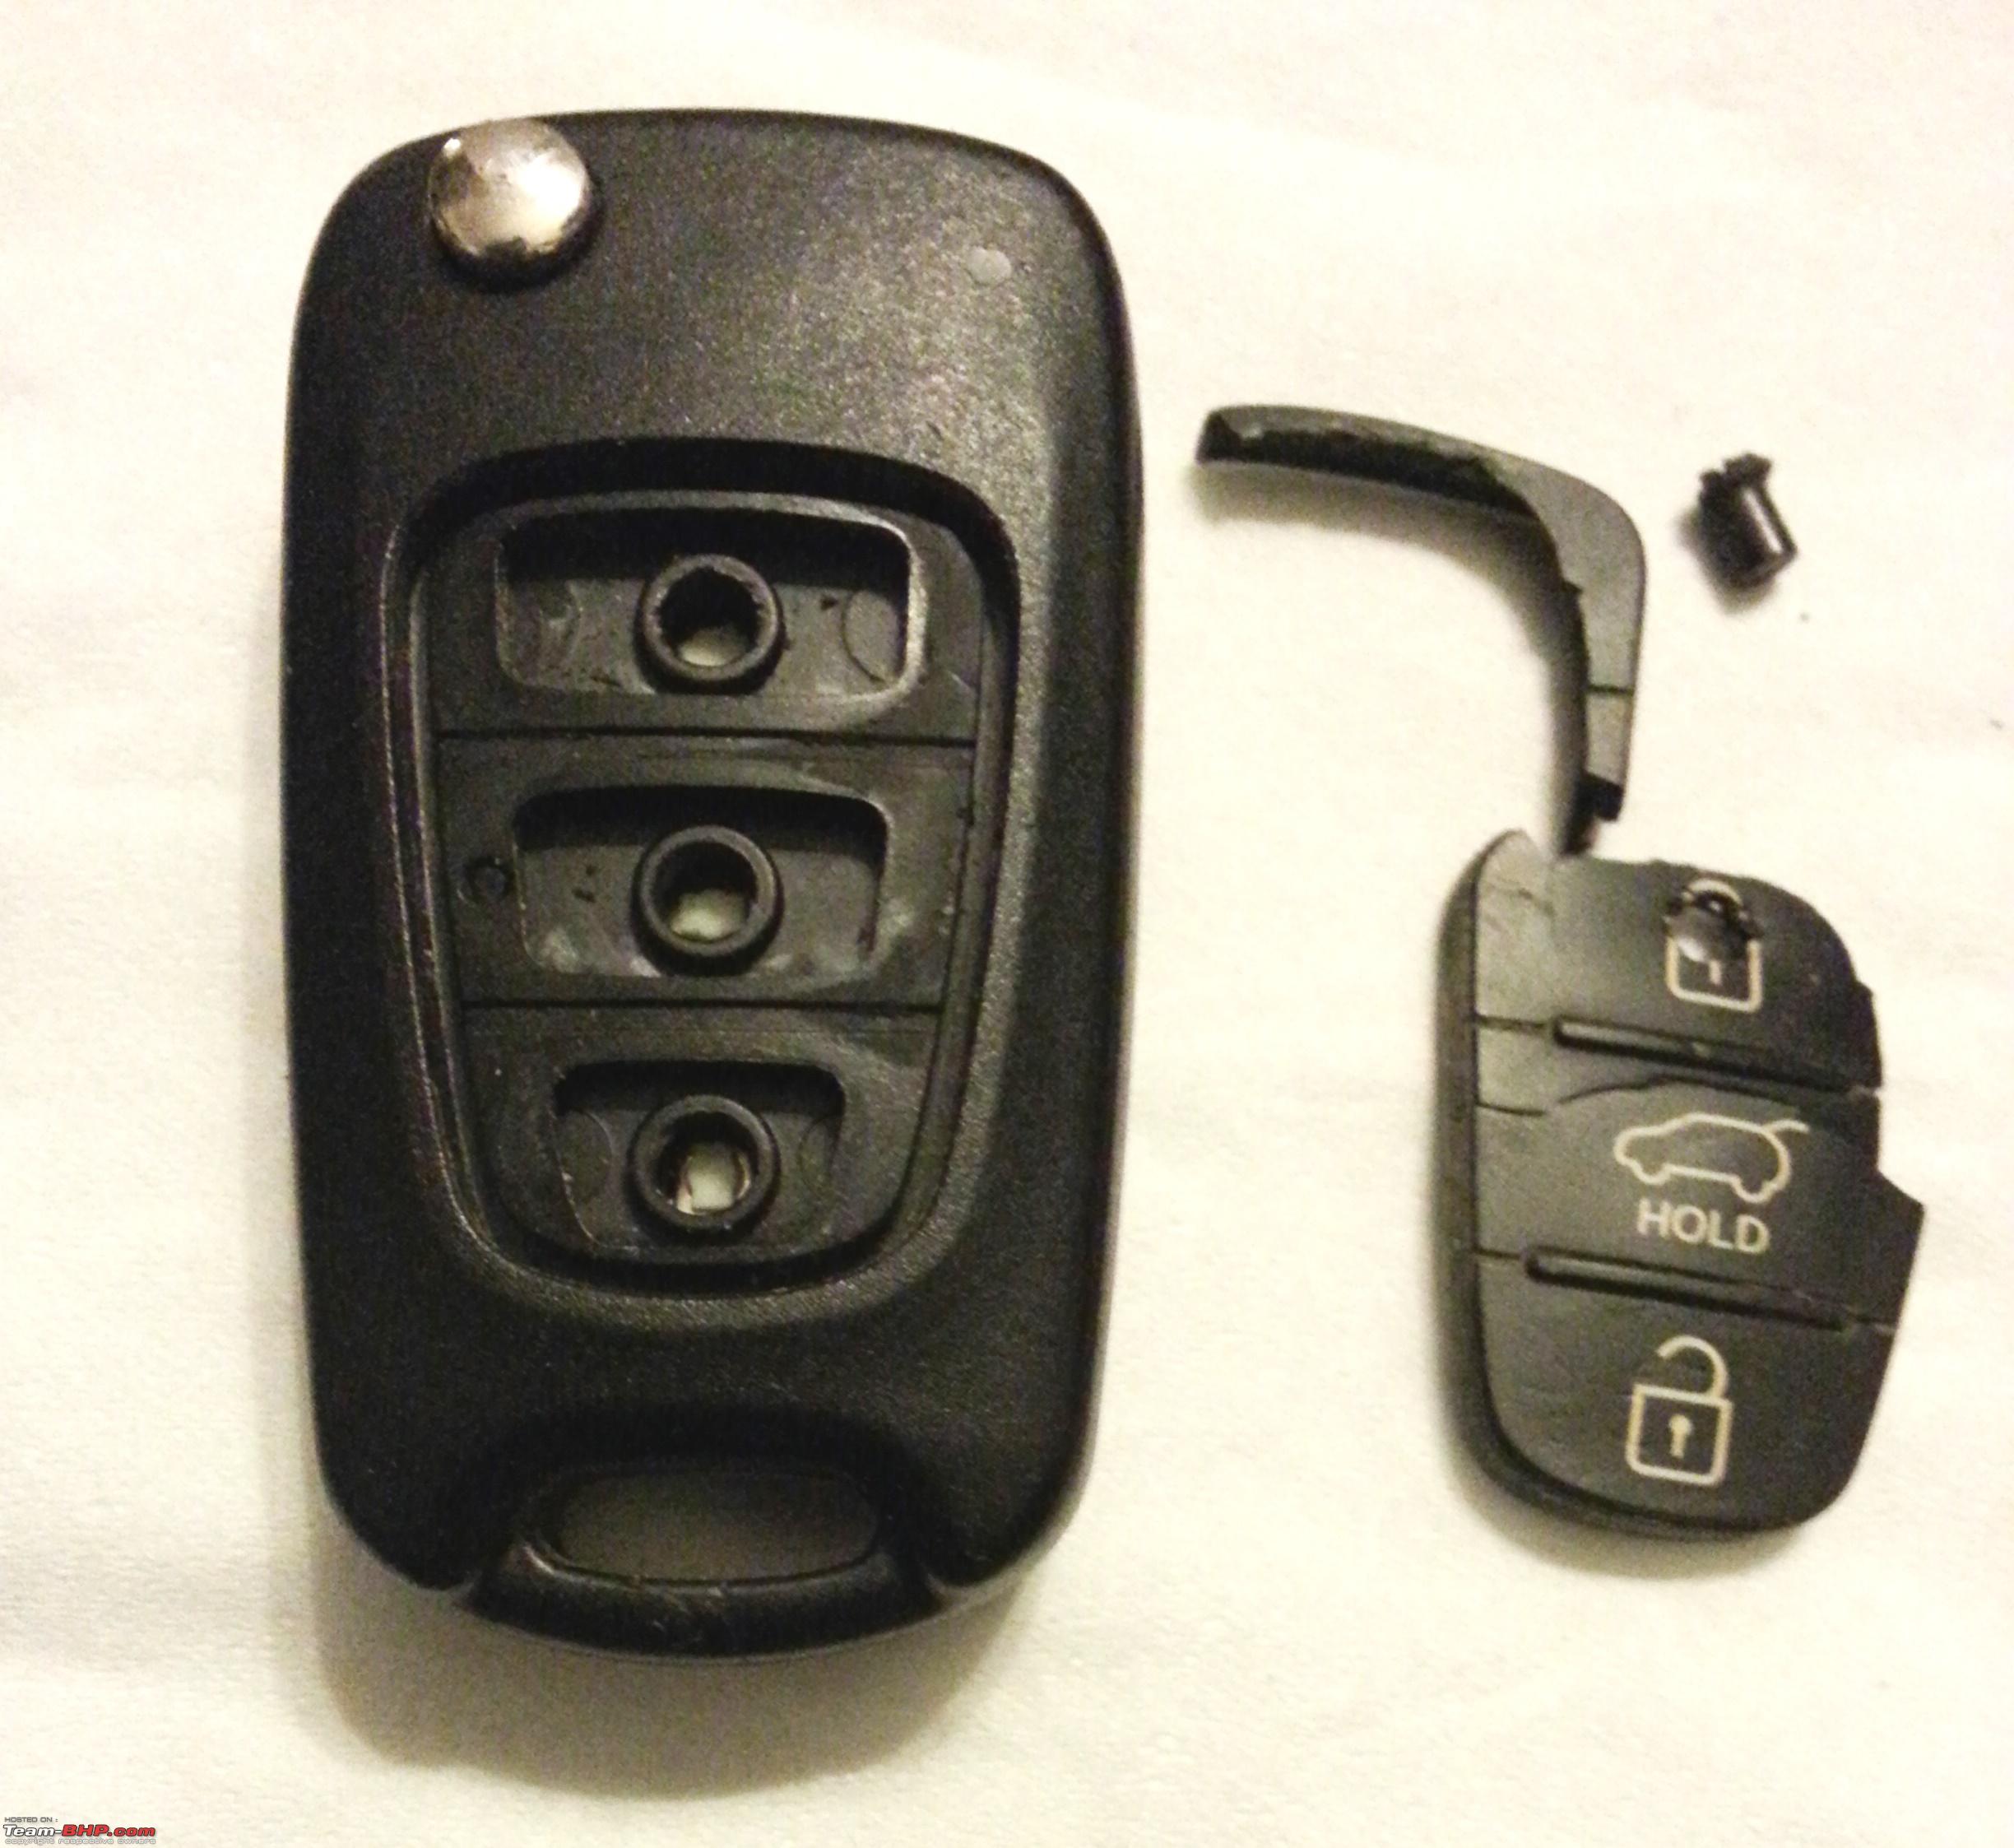 land cruiser key fob battery replacement